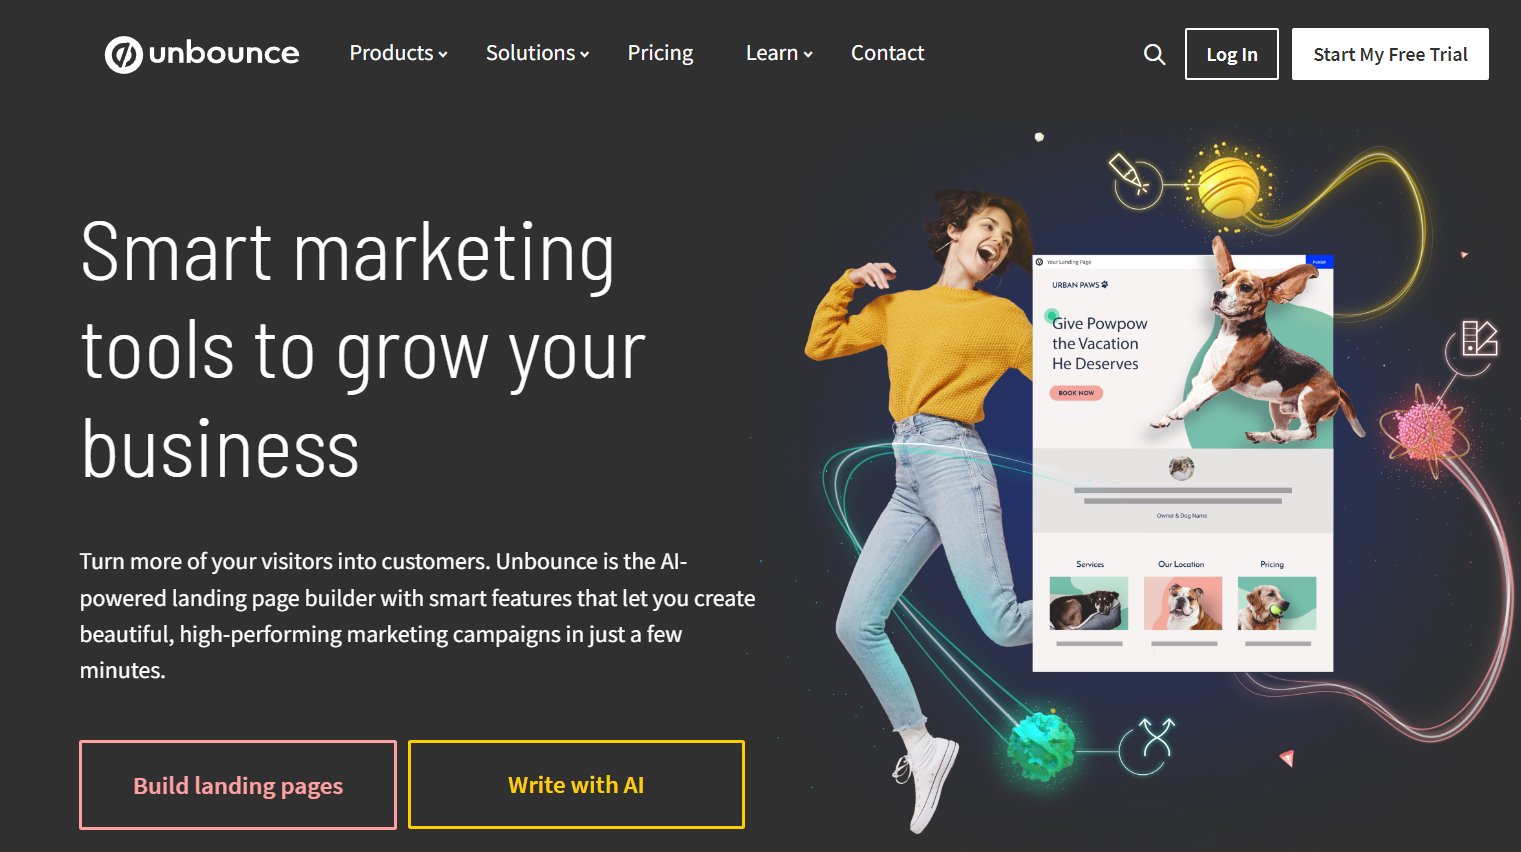 Unbounce is a great marketing tool for businesses.